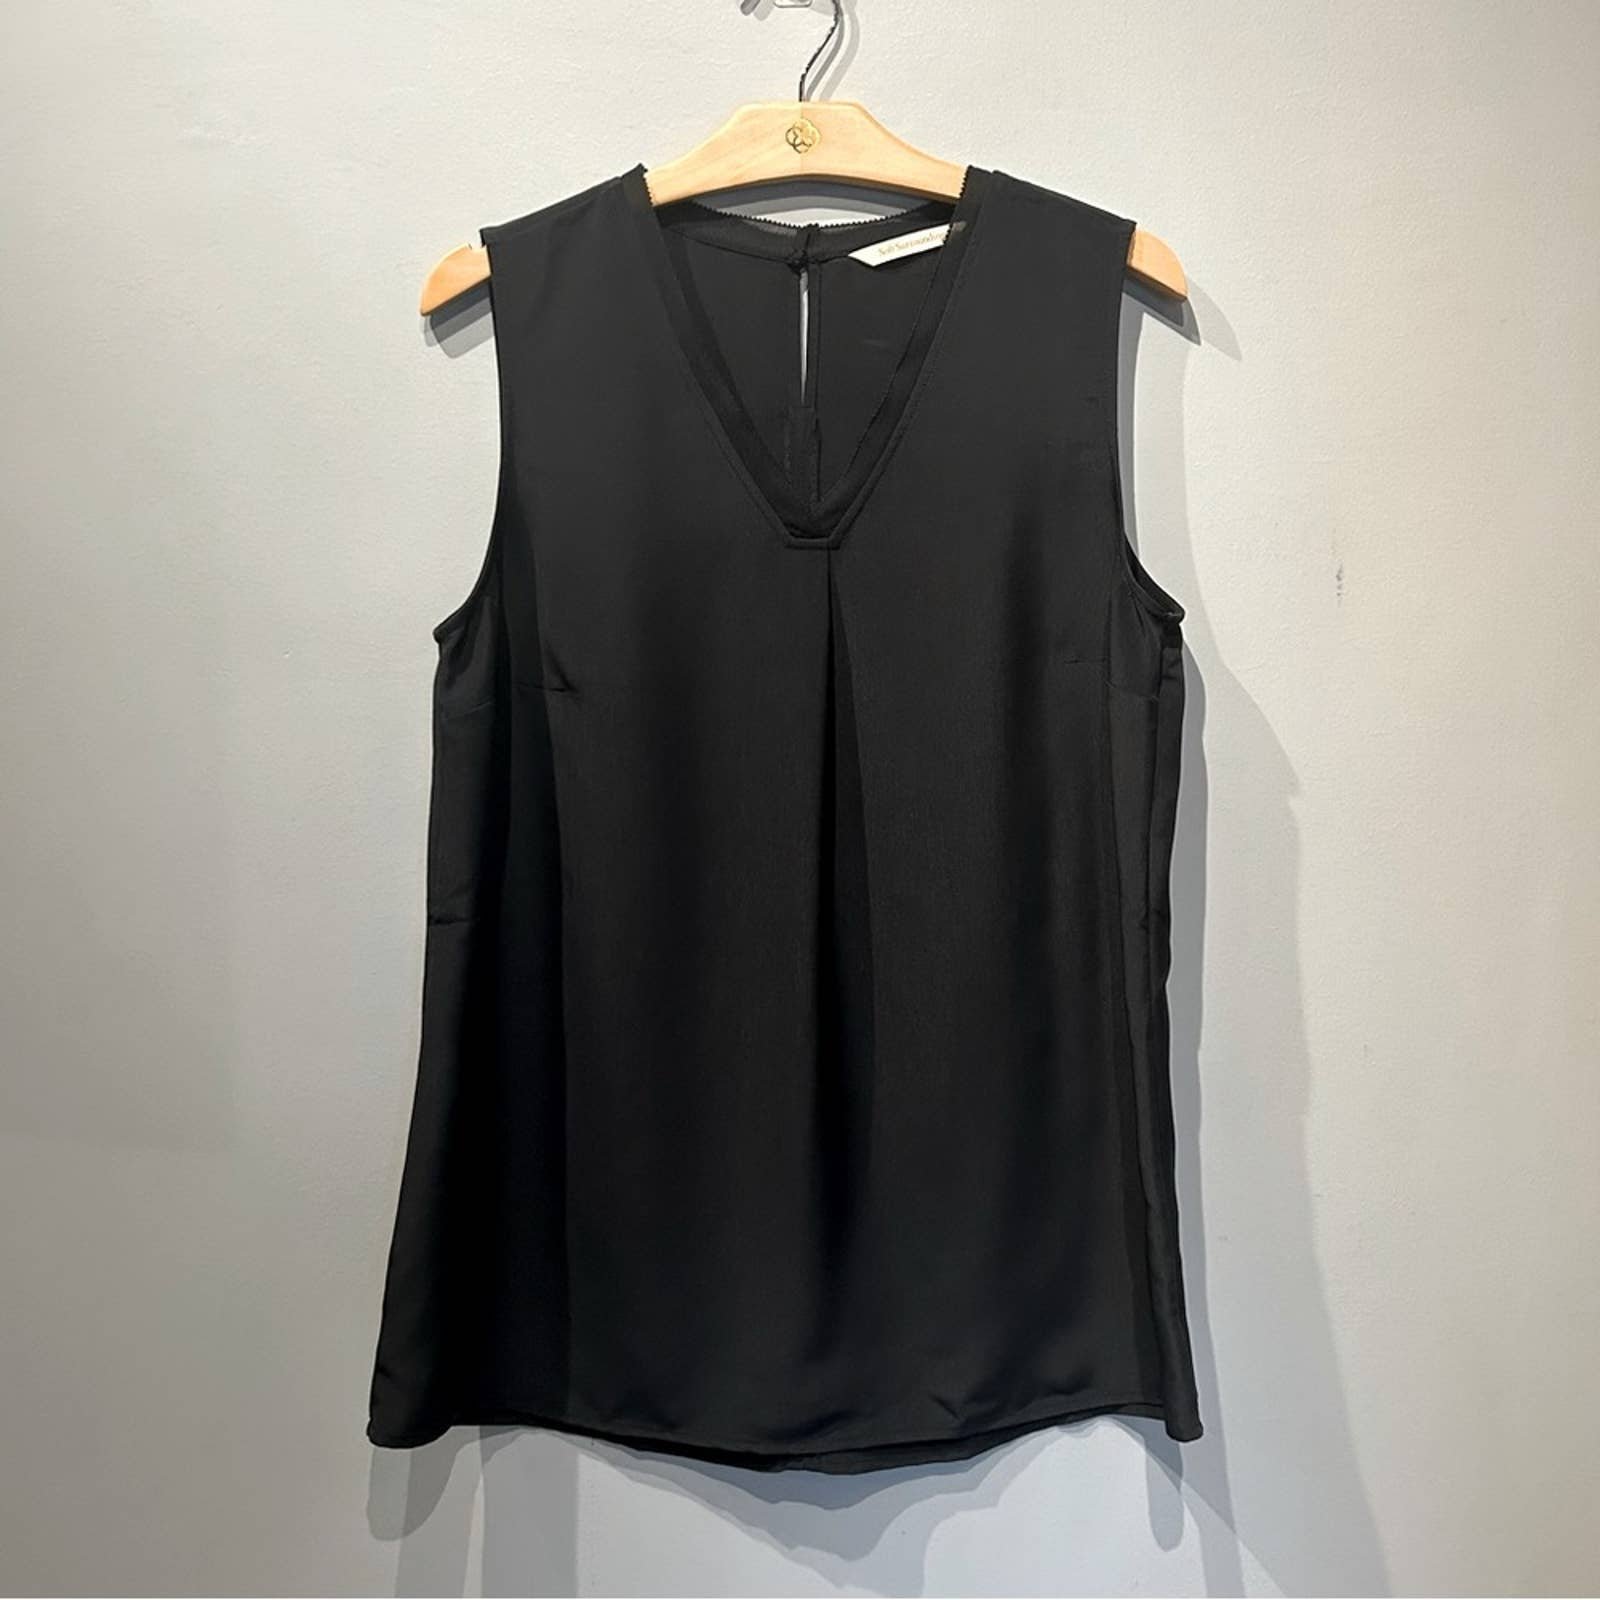 Gorgeous NWT Soft Surroundings Caranday Tank in Black mWGgyS5Wh Great